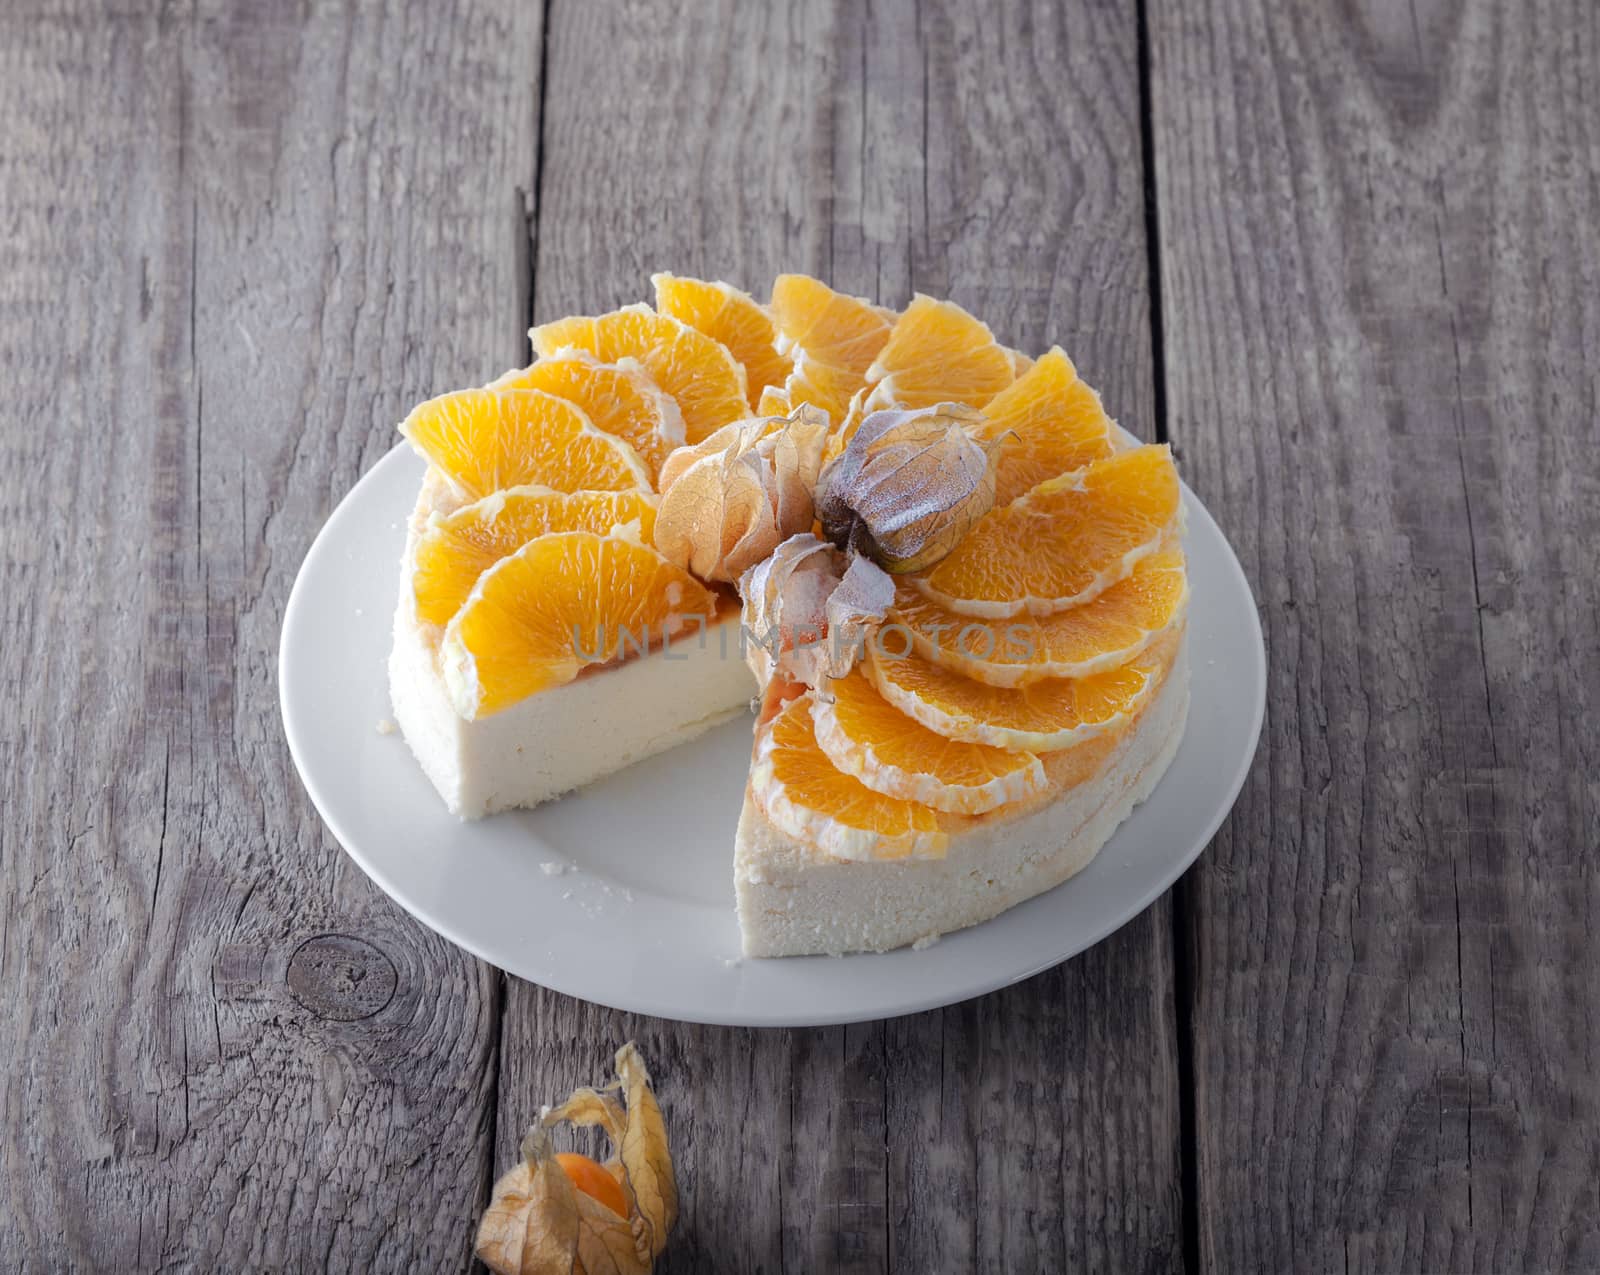 Cheesecake decorated with oranges and physalis by supercat67